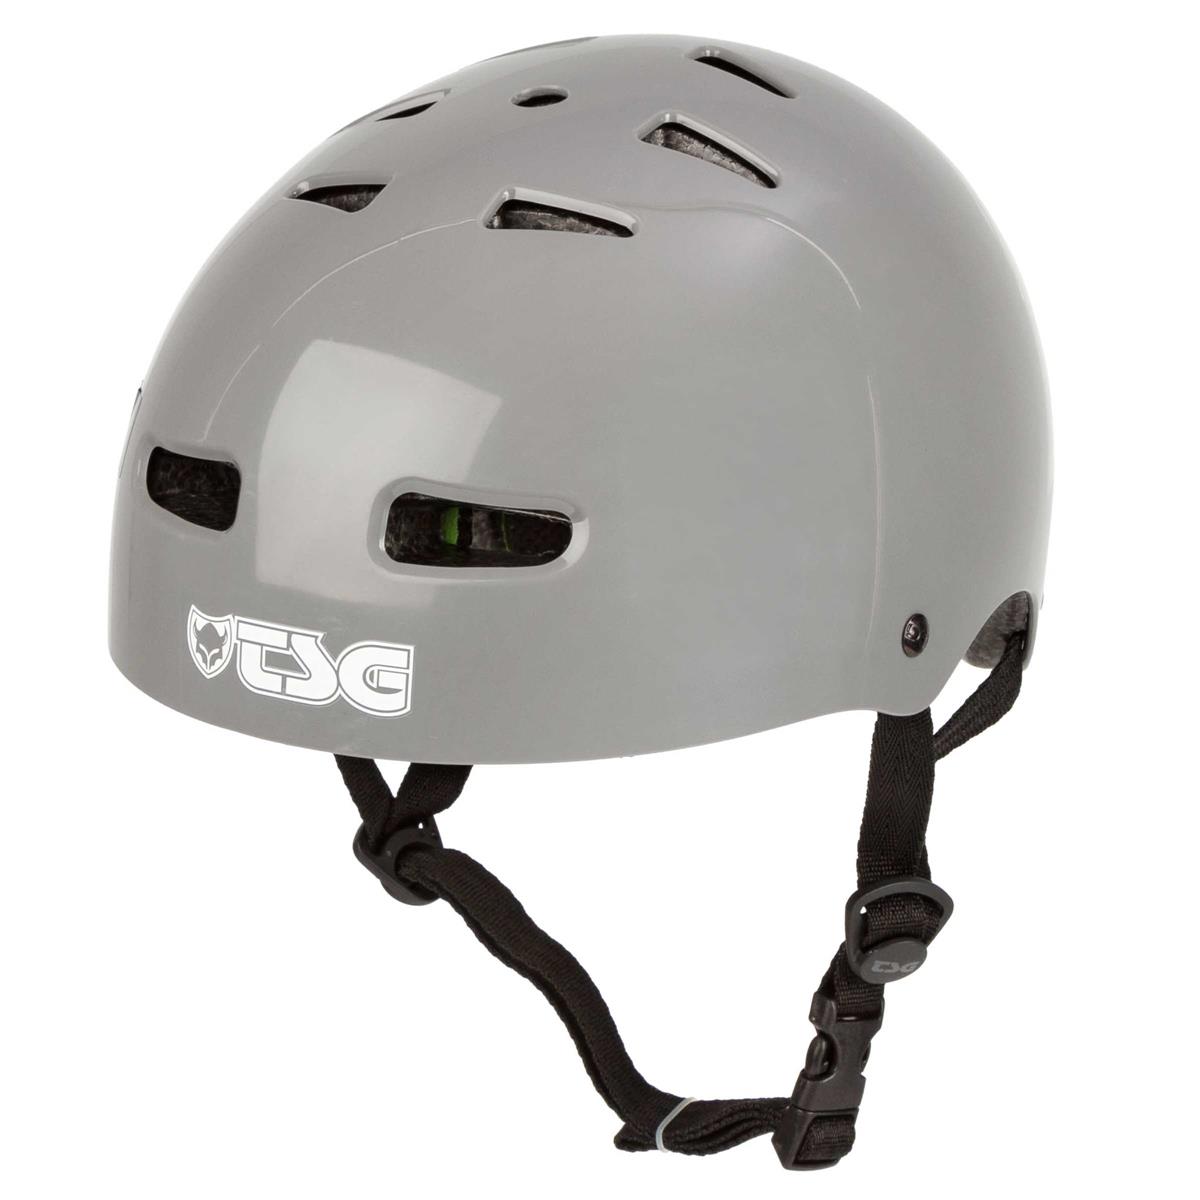 TSG BMX/Dirt Helm Skate/BMX Injected Color - Injected Grey